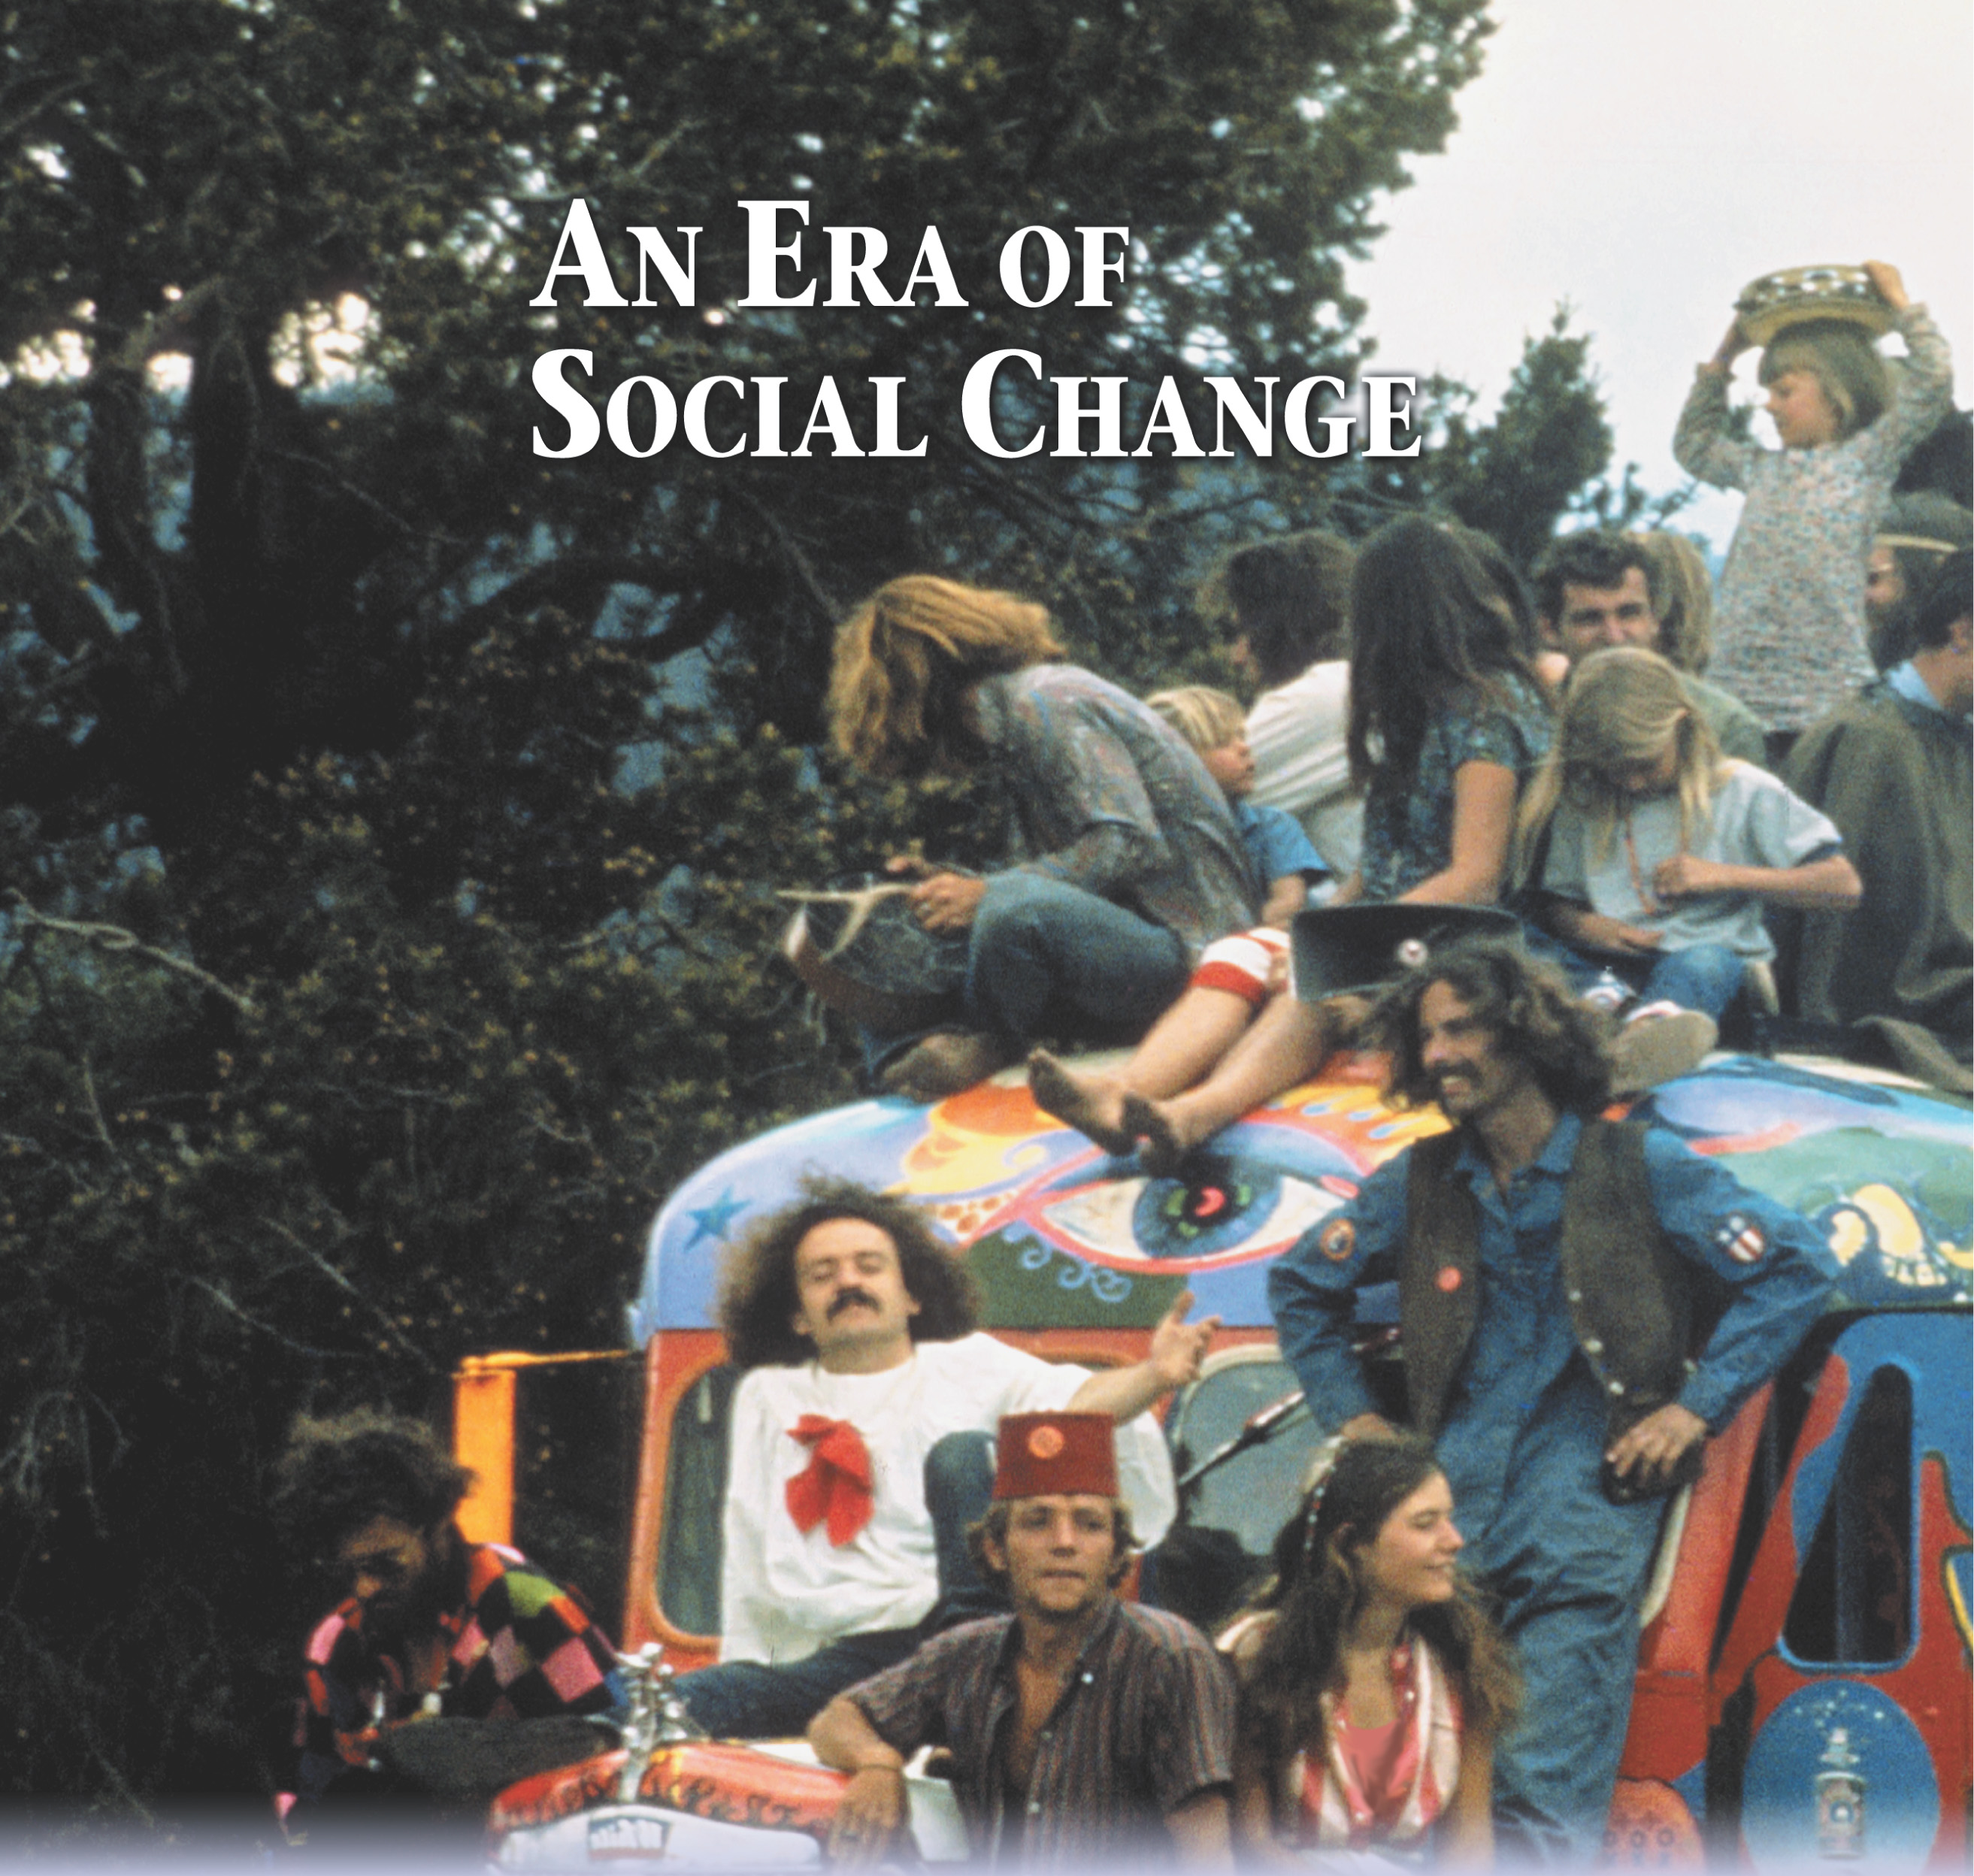 Photo: young people with long hair and colorful clothes sit atop a bus painted in wild colors. A title: An Era of Social Change.